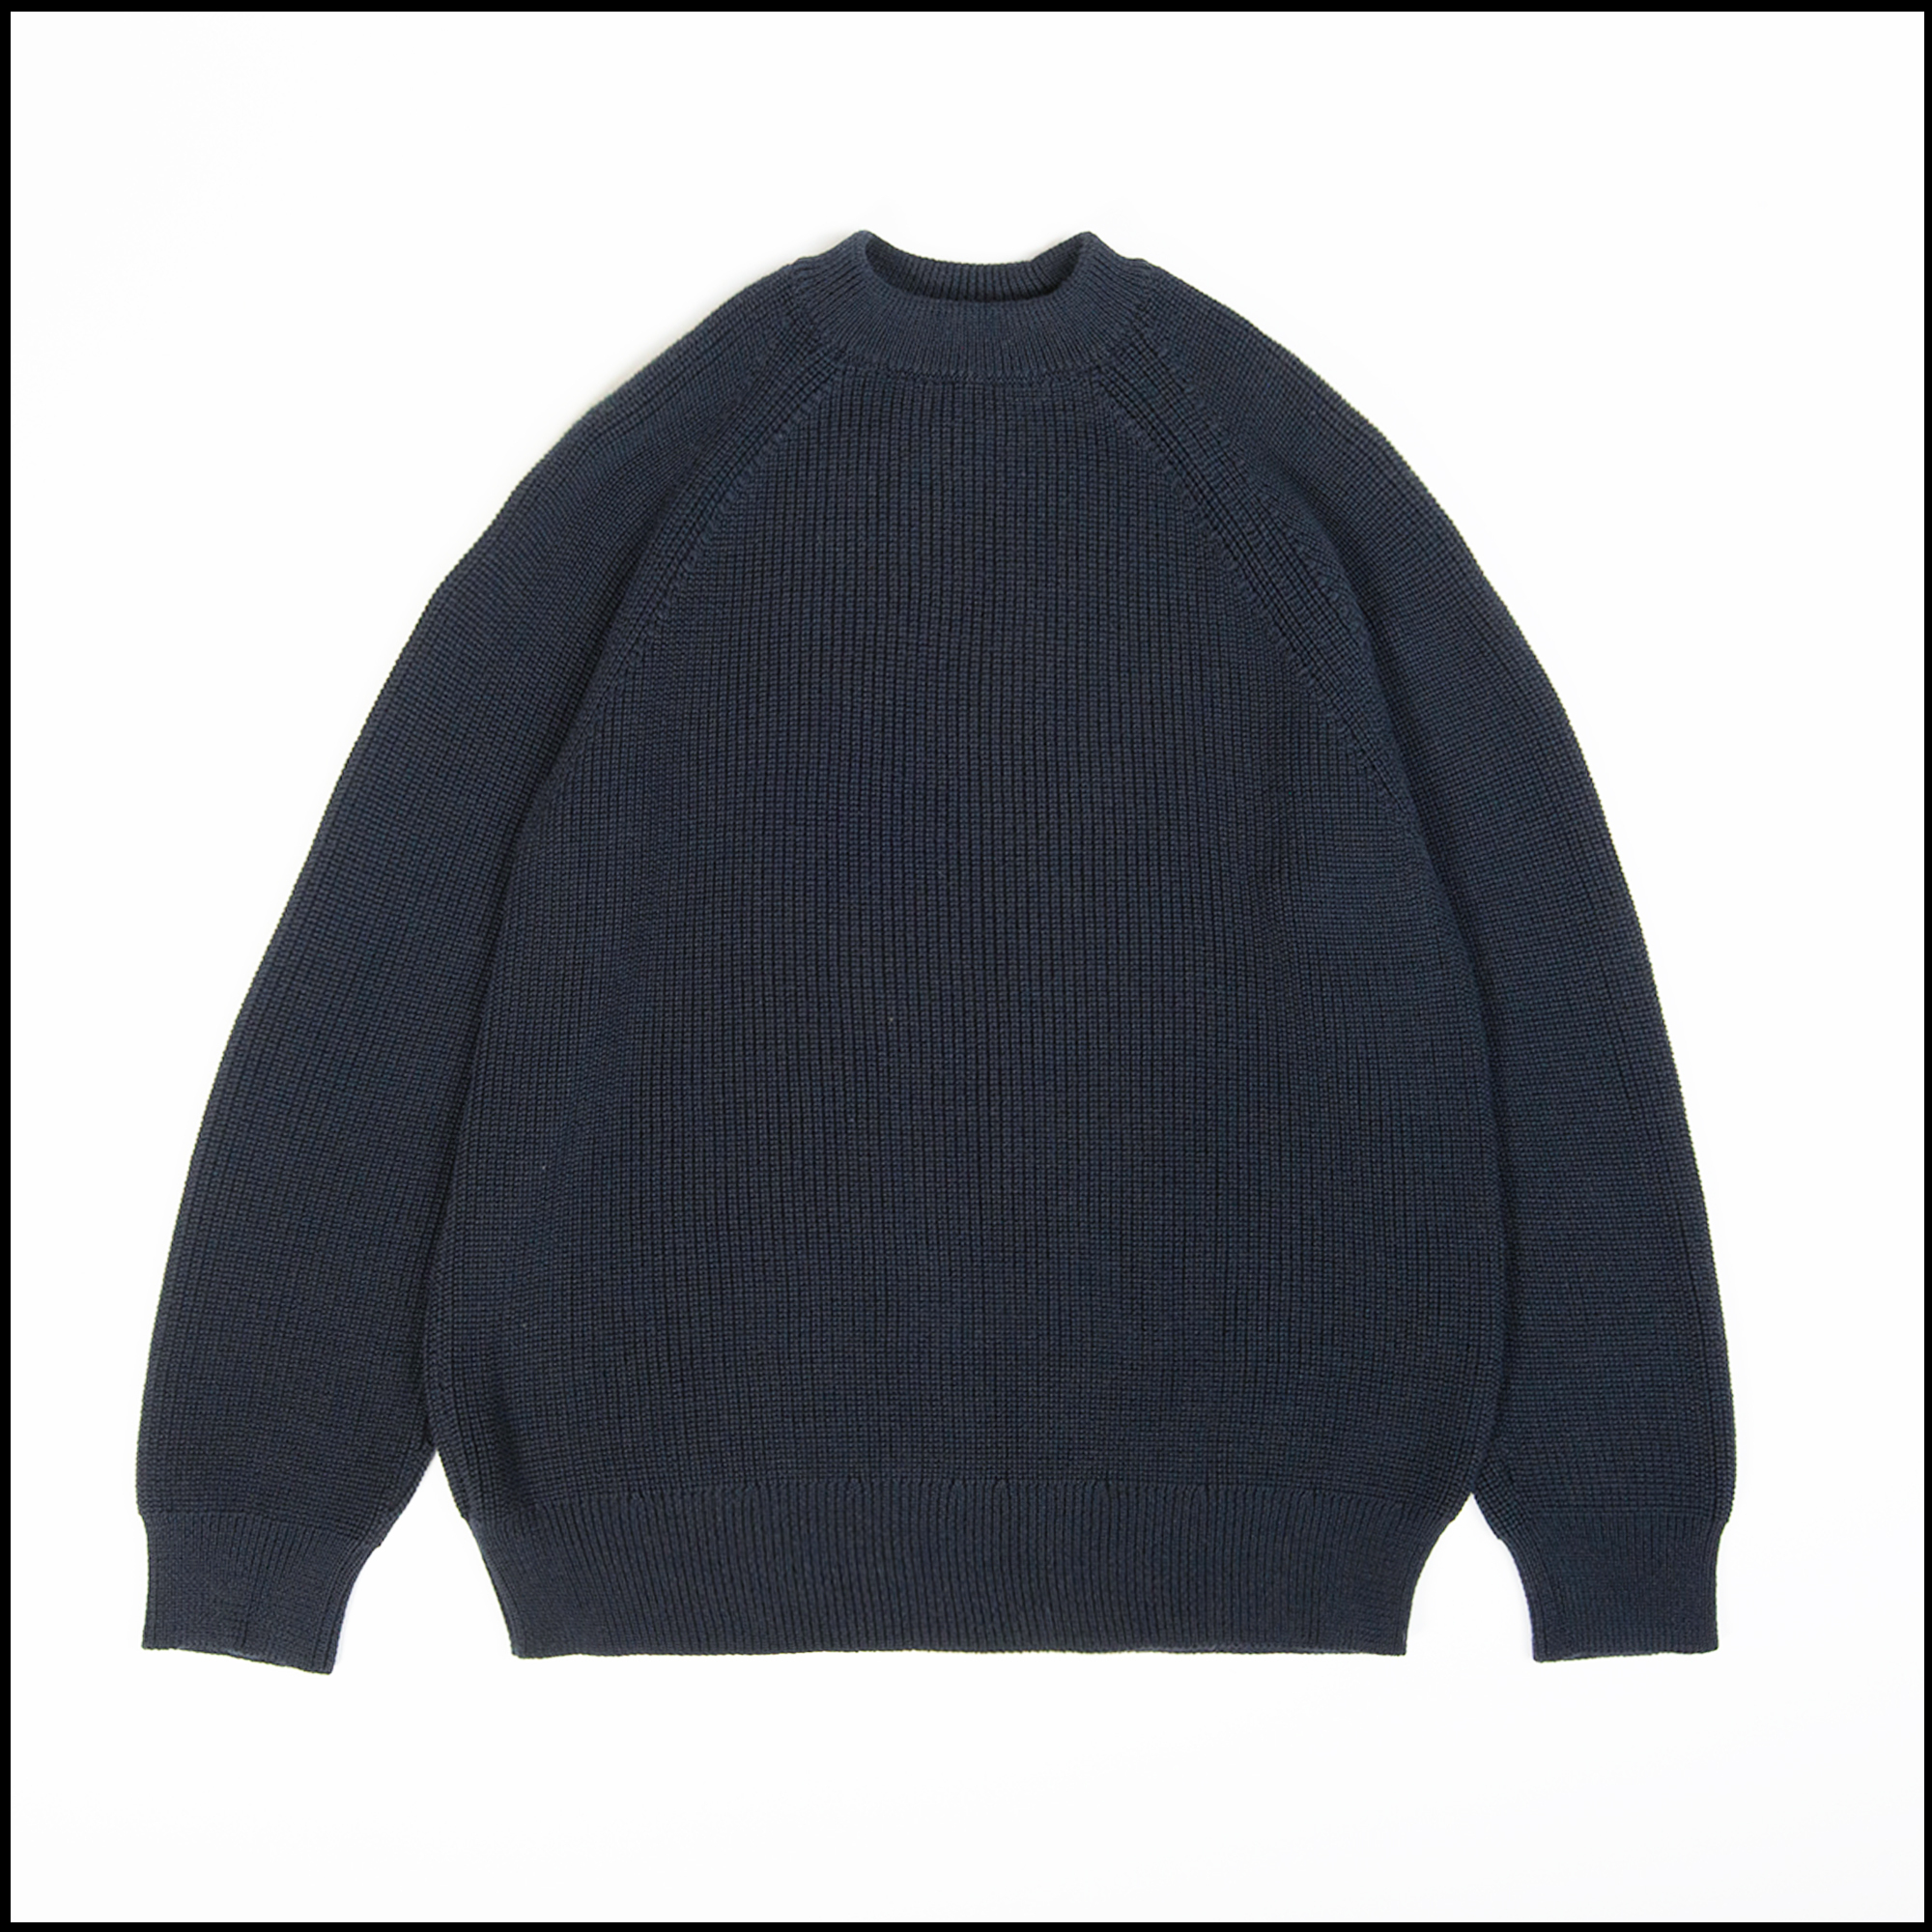 PLANO sweater in Midnight color by Arpenteur